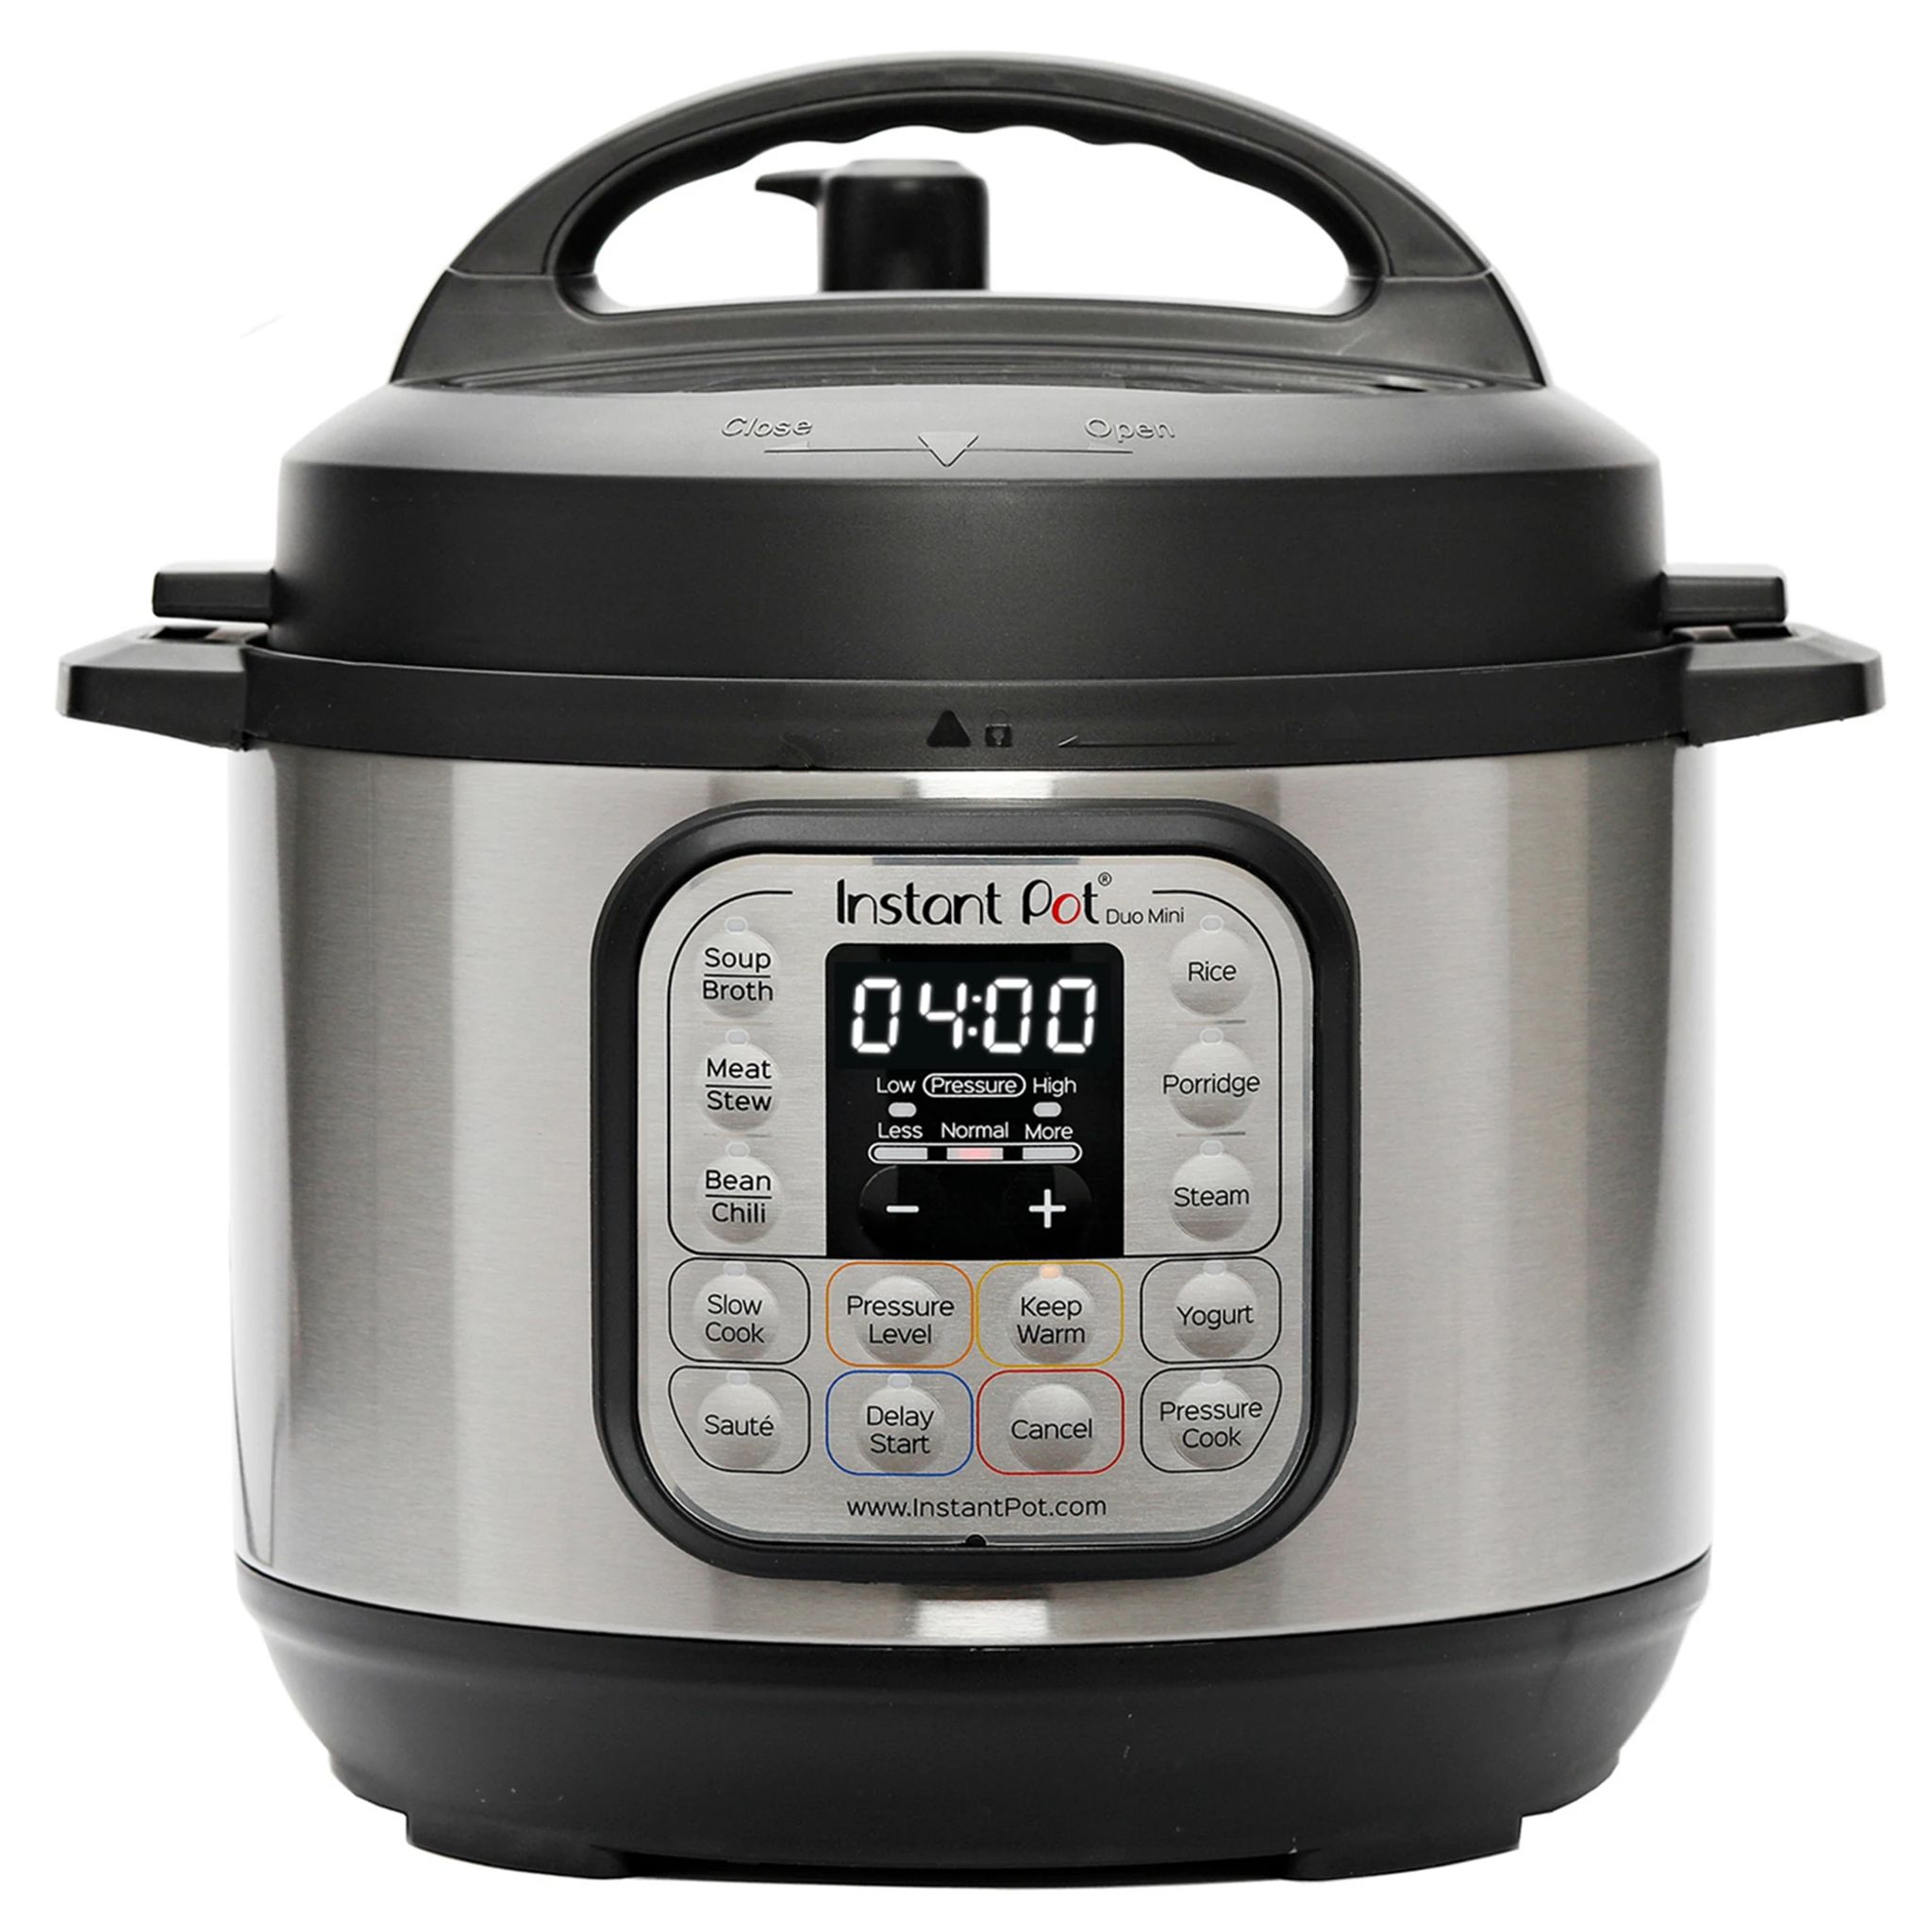 Instant Pot – Duo 3 Quart 7-in-1 Multi-Use Pressure Cooker – Black/Stainless Steel